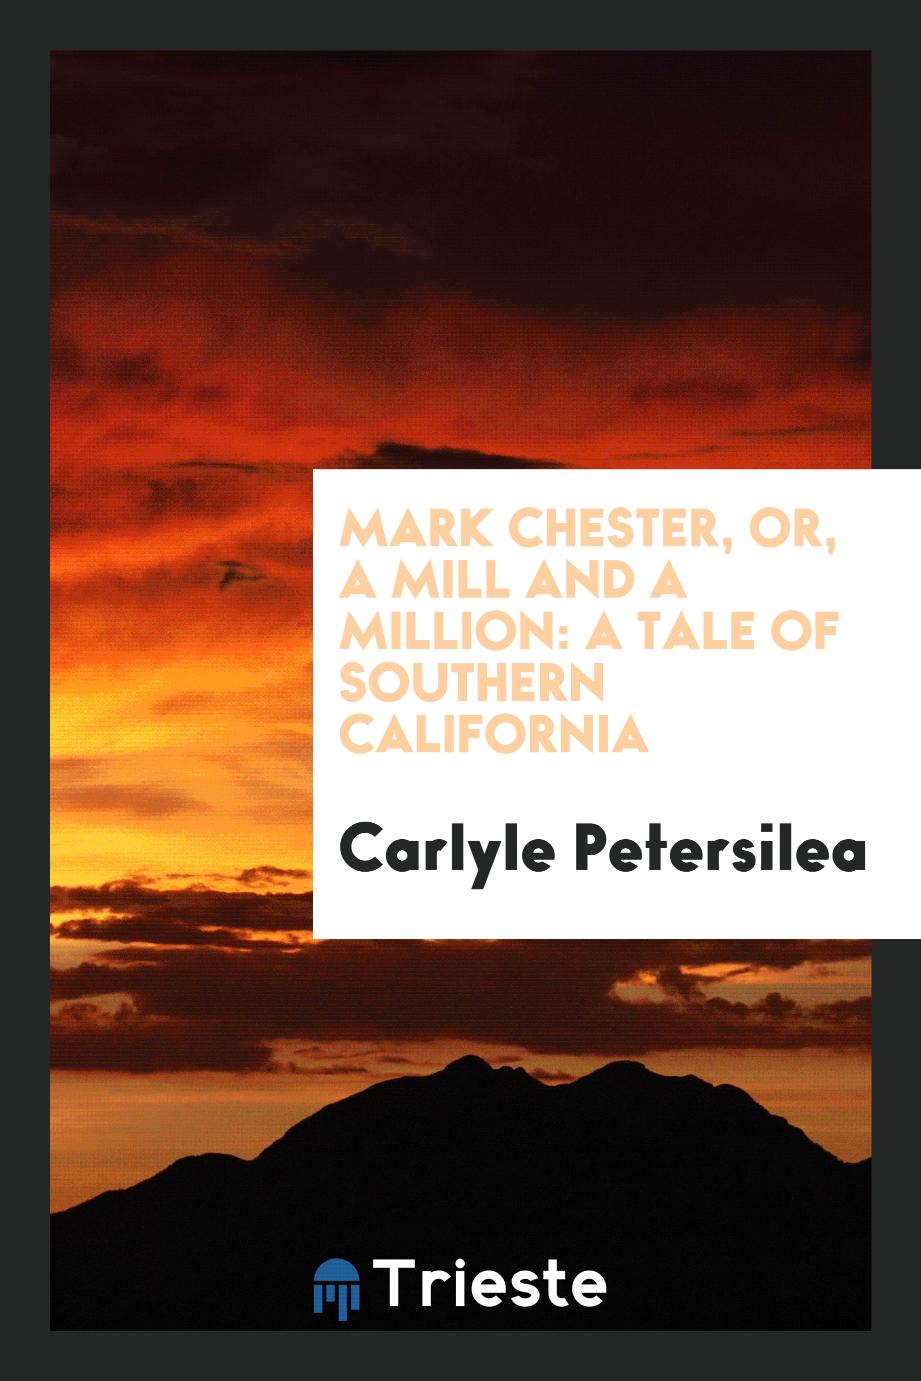 Mark Chester, or, A mill and a million: a tale of southern California